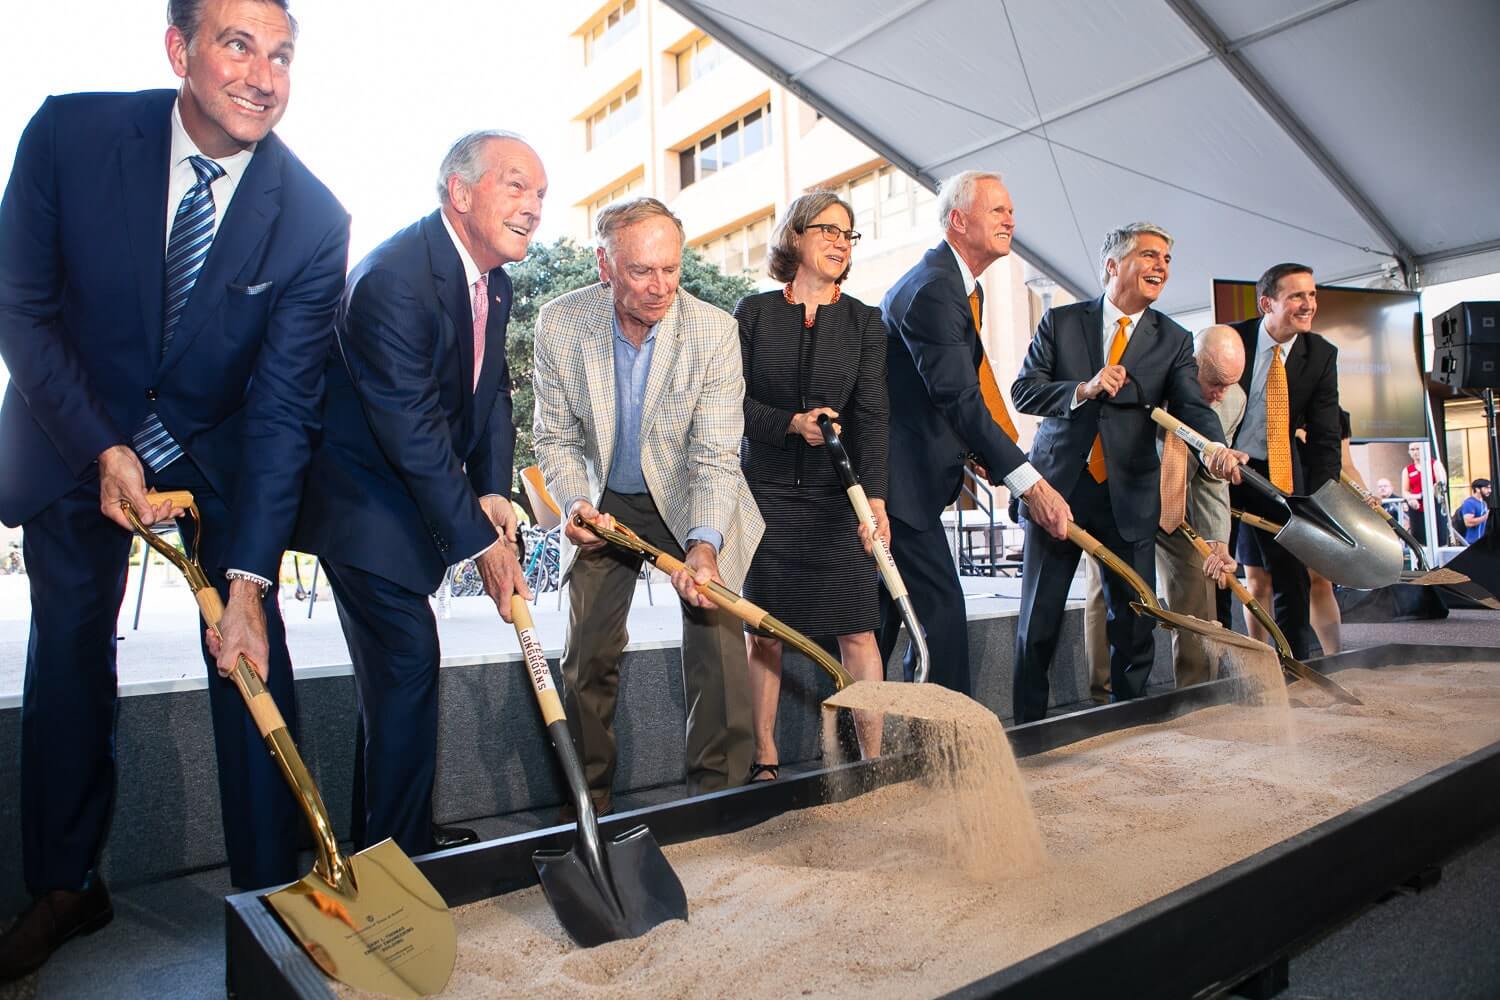 Supporters of the Gary L. Thomas Energy Engineering Building and Cockrell School and UT leadership ceremonially break ground on the new building, set to open in 2021. Gary Thomas is pictured in the center, between Cockrell School Dean Sharon L. Wood and UT President Gregory L. Fenves.